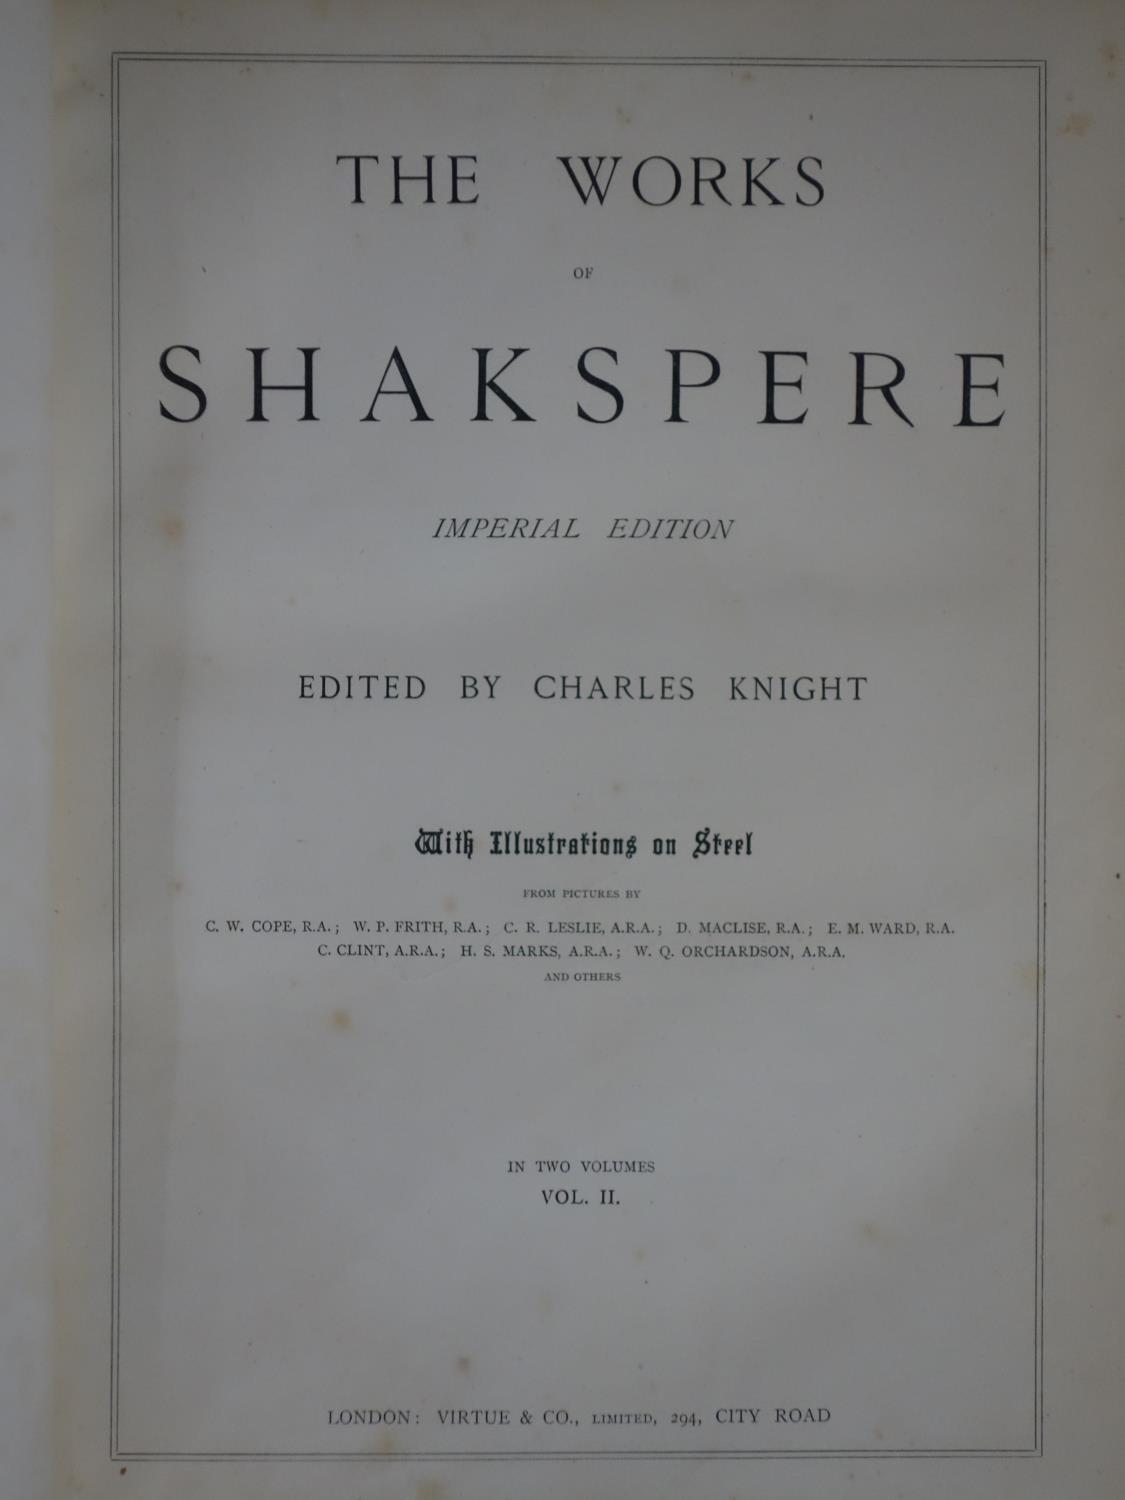 'The Works of Shakspere' Imperial Edition, edited by Charles Knight, in 2 volumes with illustrations - Bild 5 aus 5